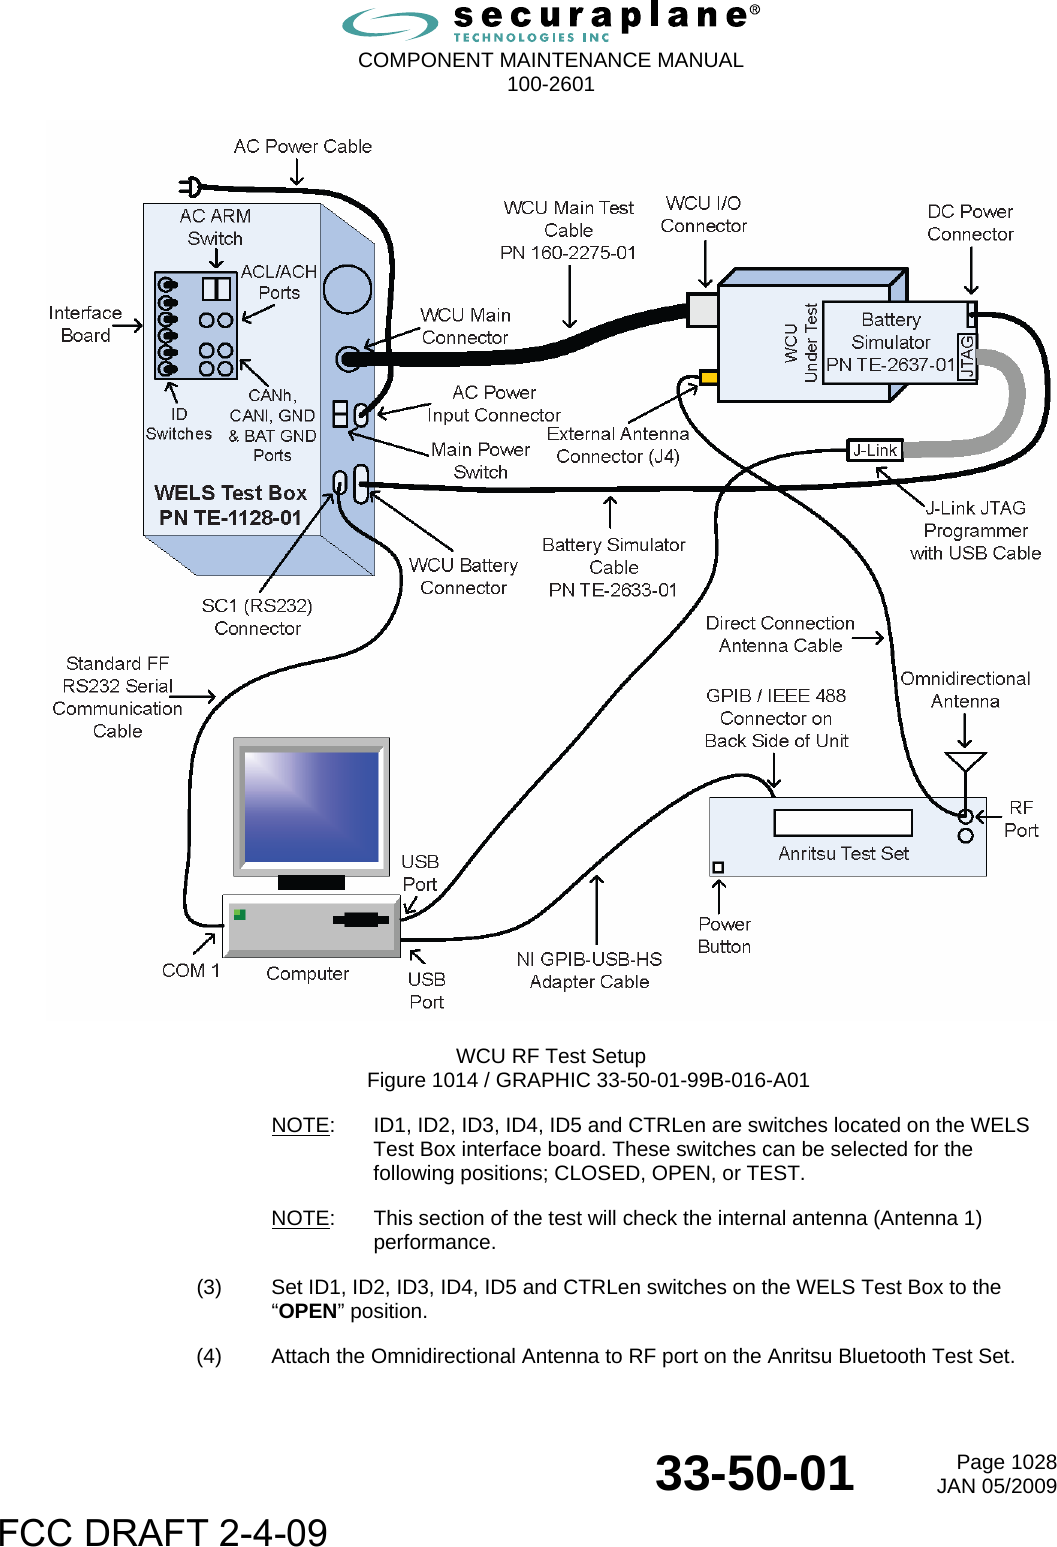  COMPONENT MAINTENANCE MANUAL  100-2601  33-50-01  Page 1028JAN 05/2009   WCU RF Test Setup Figure 1014 / GRAPHIC 33-50-01-99B-016-A01 NOTE:  ID1, ID2, ID3, ID4, ID5 and CTRLen are switches located on the WELS Test Box interface board. These switches can be selected for the following positions; CLOSED, OPEN, or TEST. NOTE:  This section of the test will check the internal antenna (Antenna 1) performance. (3)  Set ID1, ID2, ID3, ID4, ID5 and CTRLen switches on the WELS Test Box to the “OPEN” position. (4)  Attach the Omnidirectional Antenna to RF port on the Anritsu Bluetooth Test Set. FCC DRAFT 2-4-09